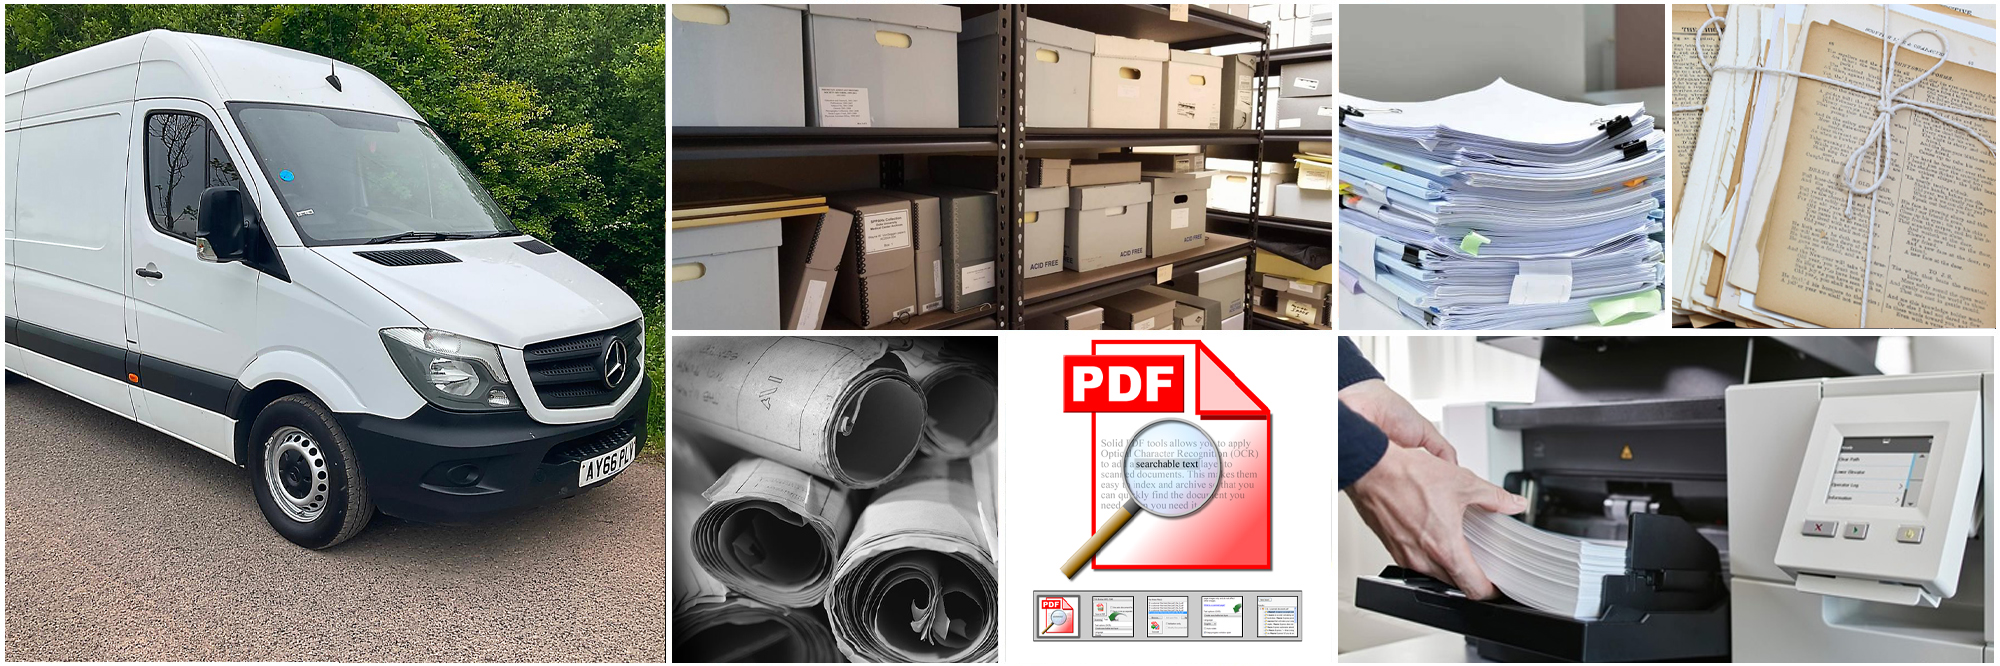 Document Scanning Solutions in Oxford UK